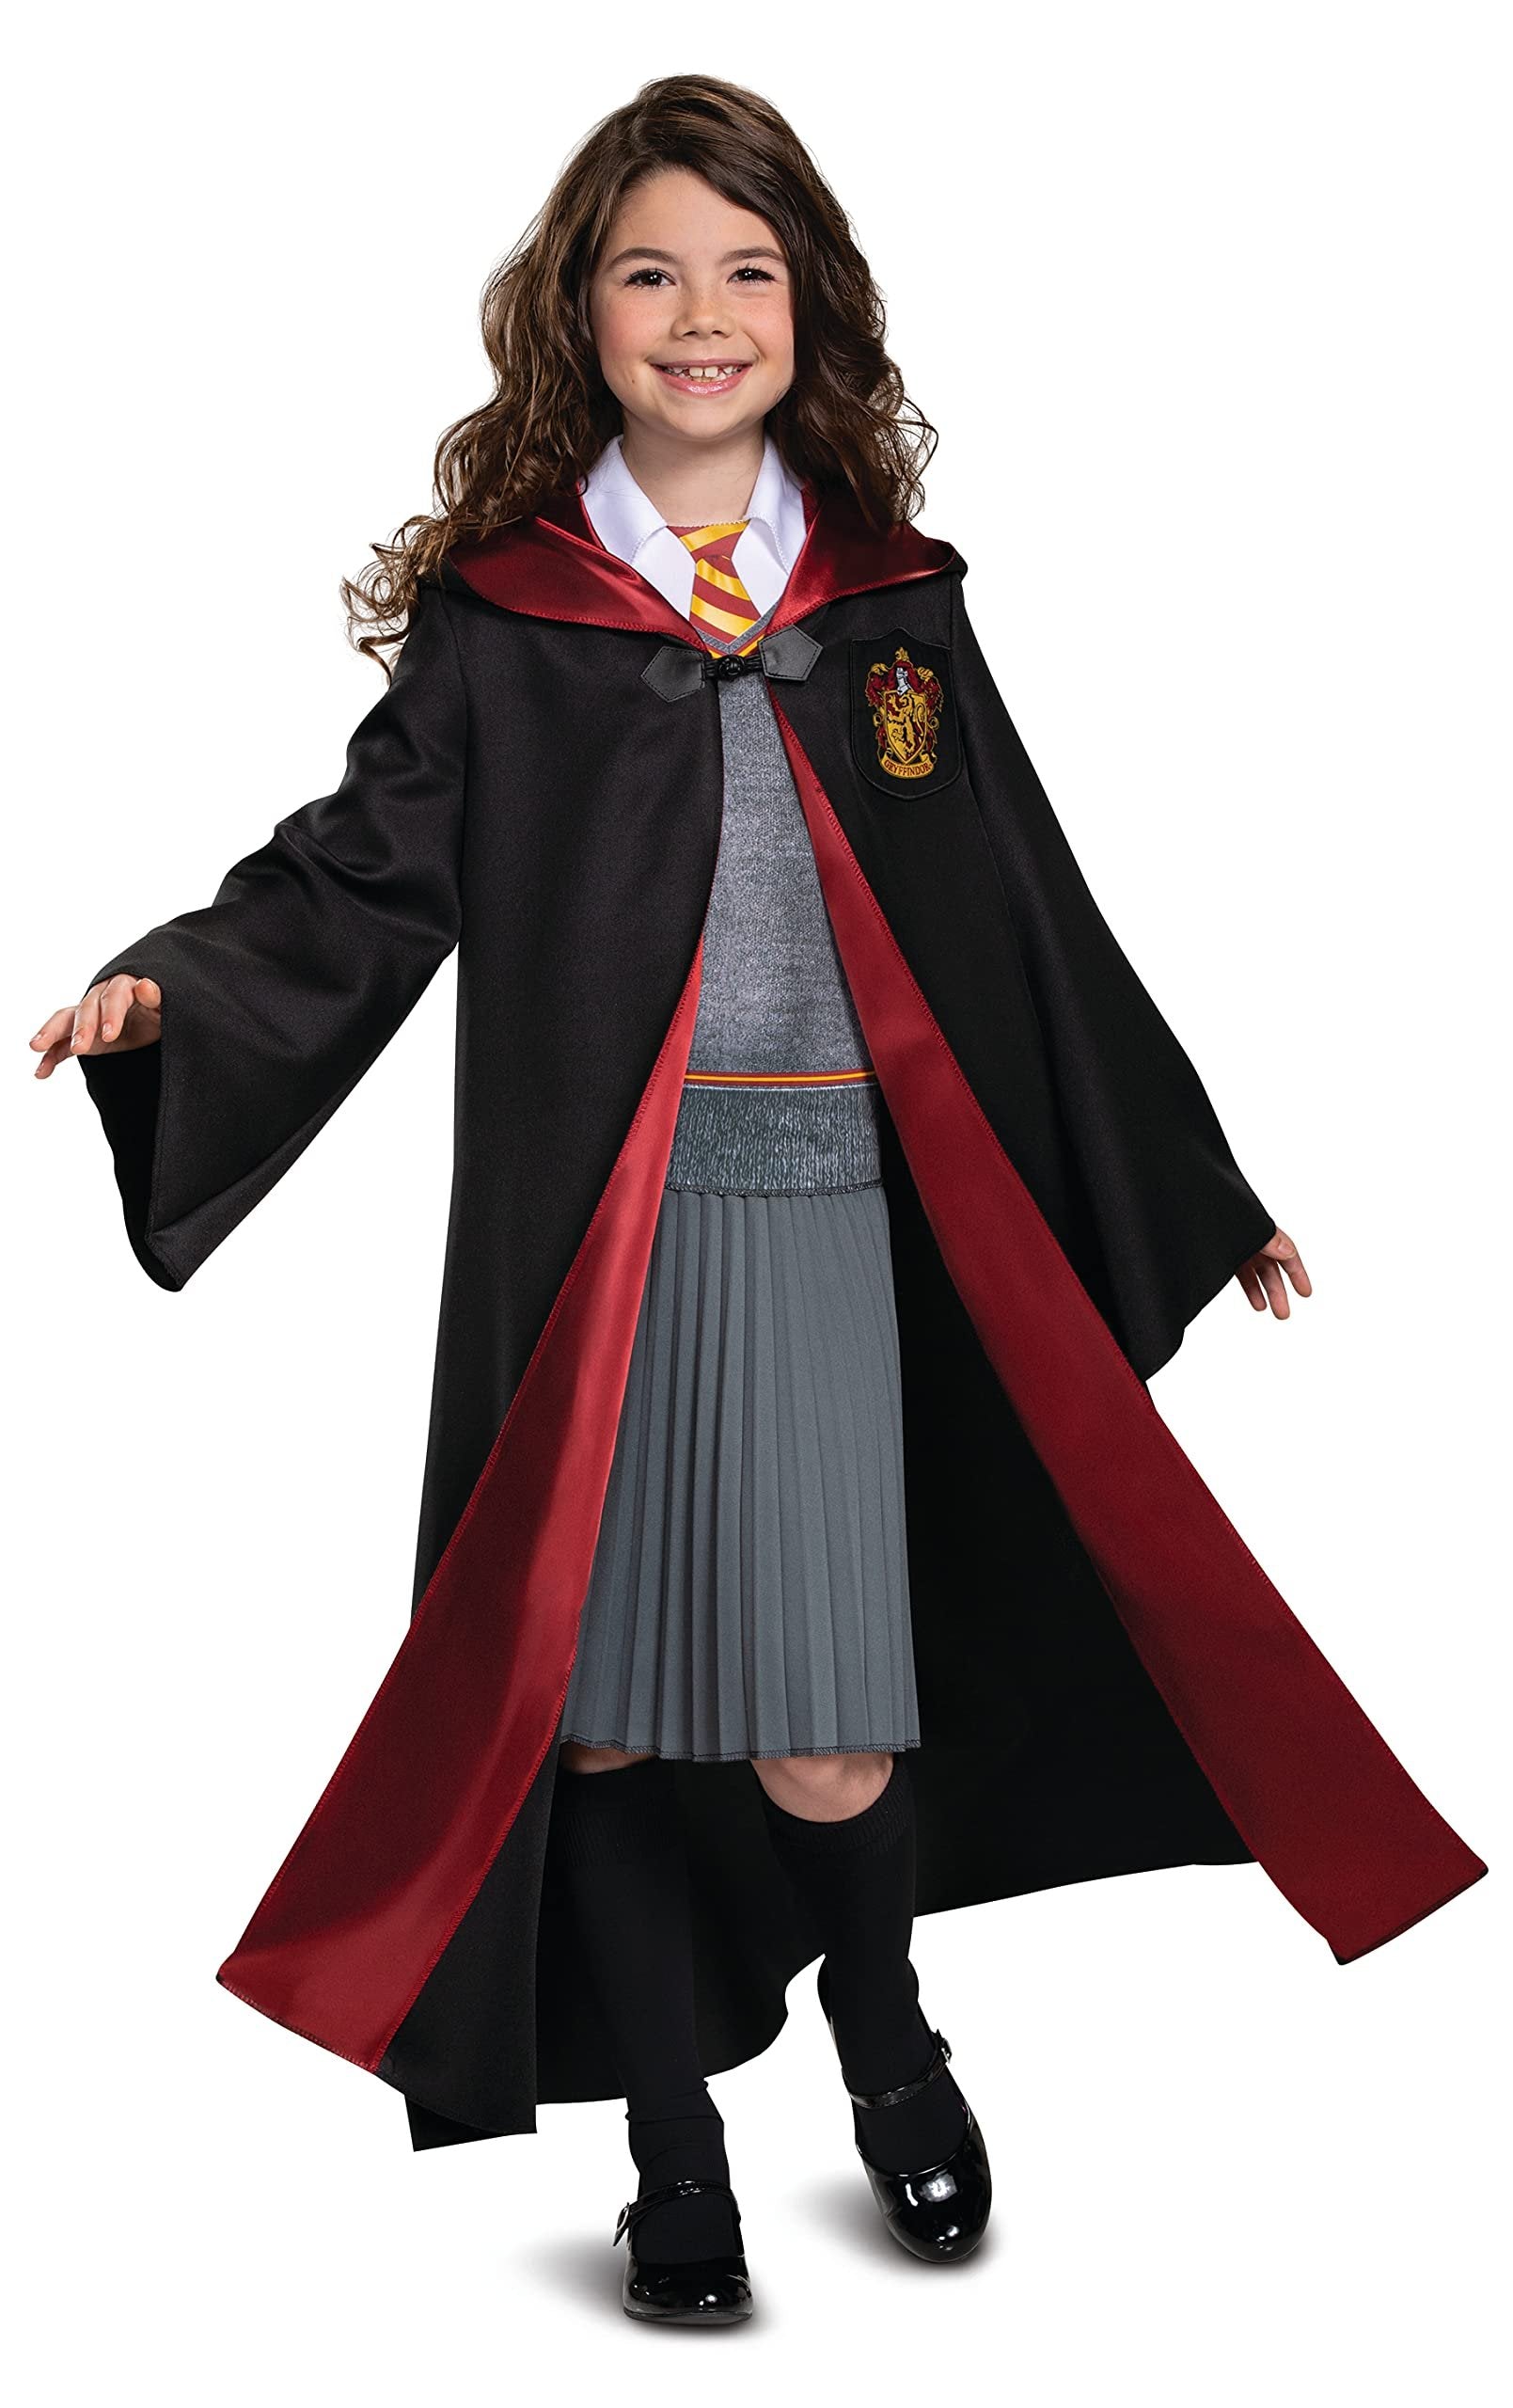 Disguise Harry Potter Hermione Granger Deluxe Girls Costume, Black & Red, Kids Size Small (4-6x)